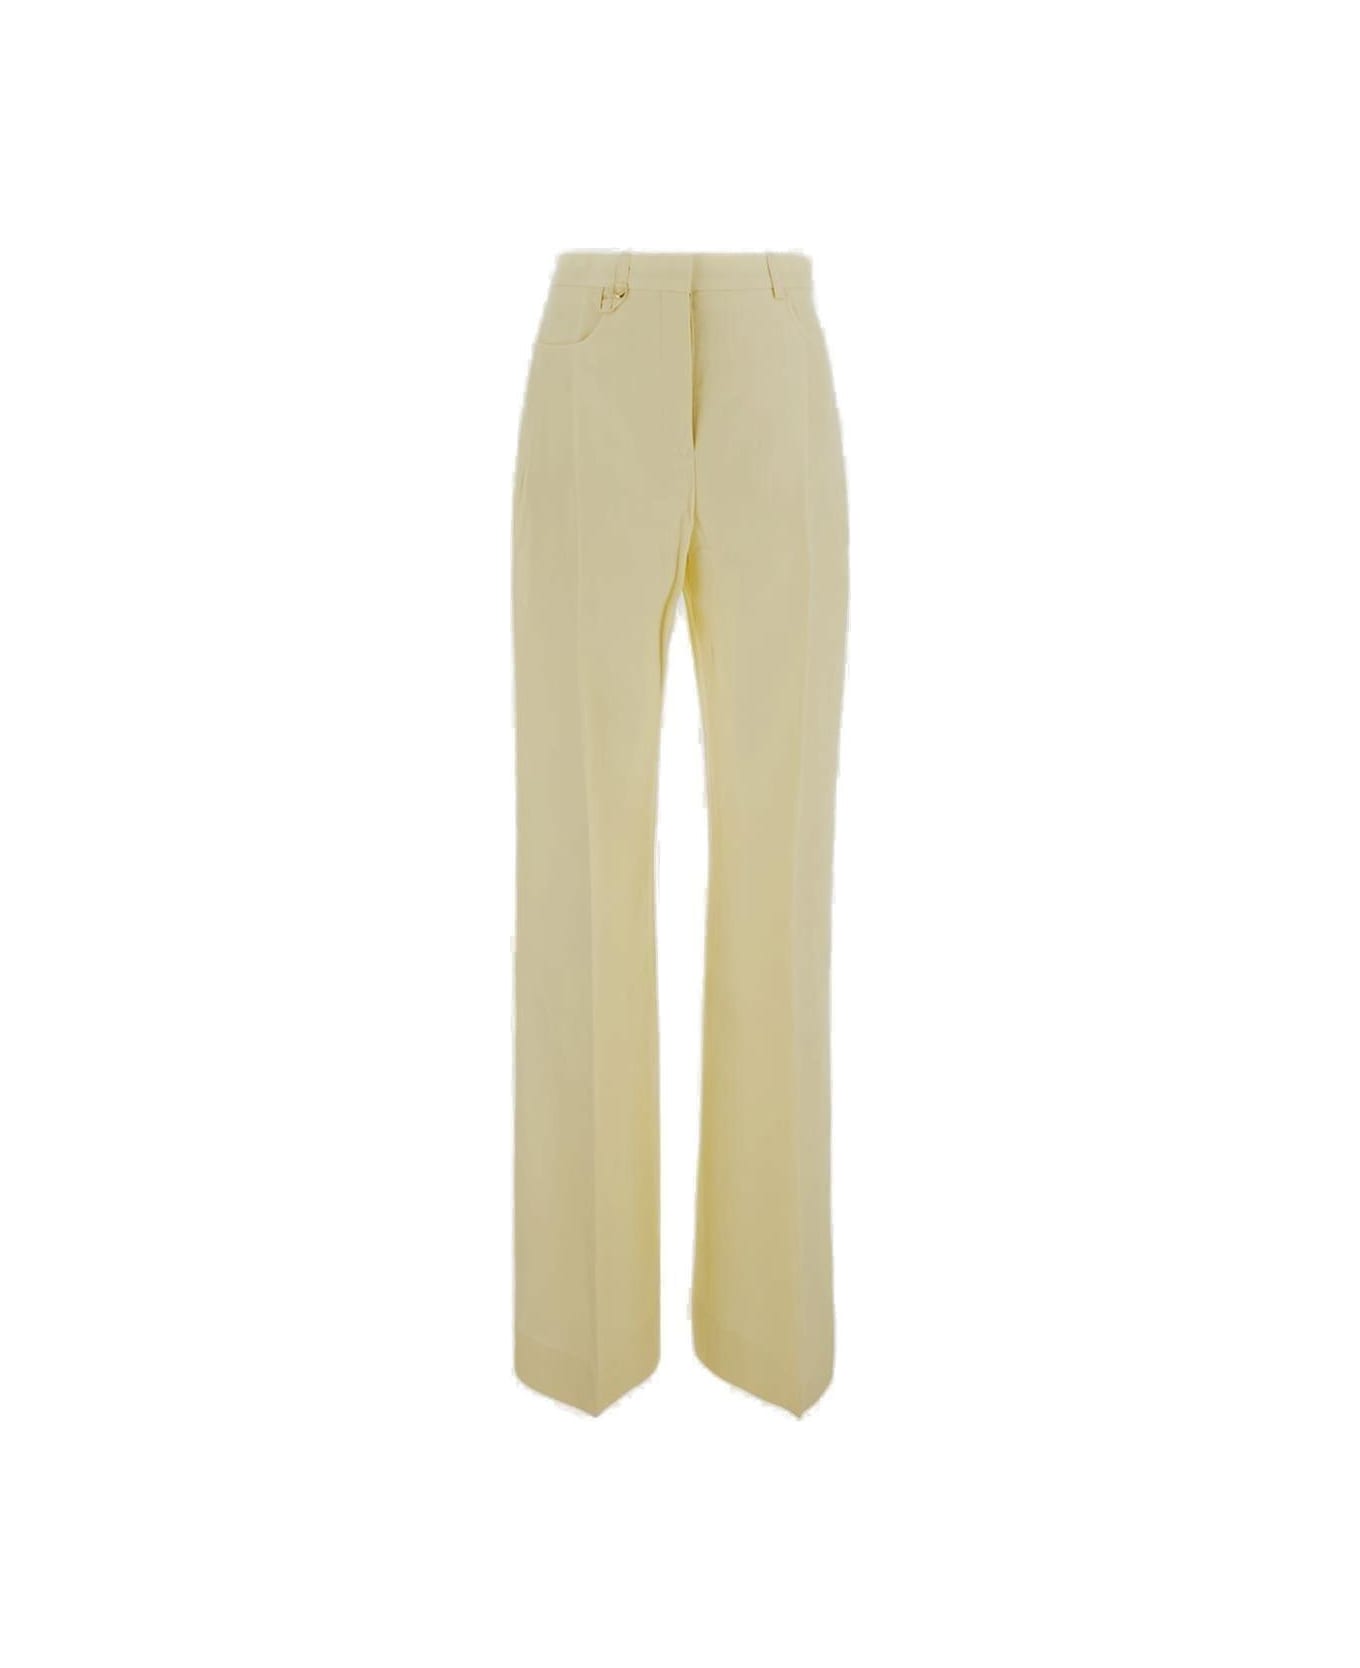 Jacquemus High Waist Flare Trousers - Pale Yellow ボトムス